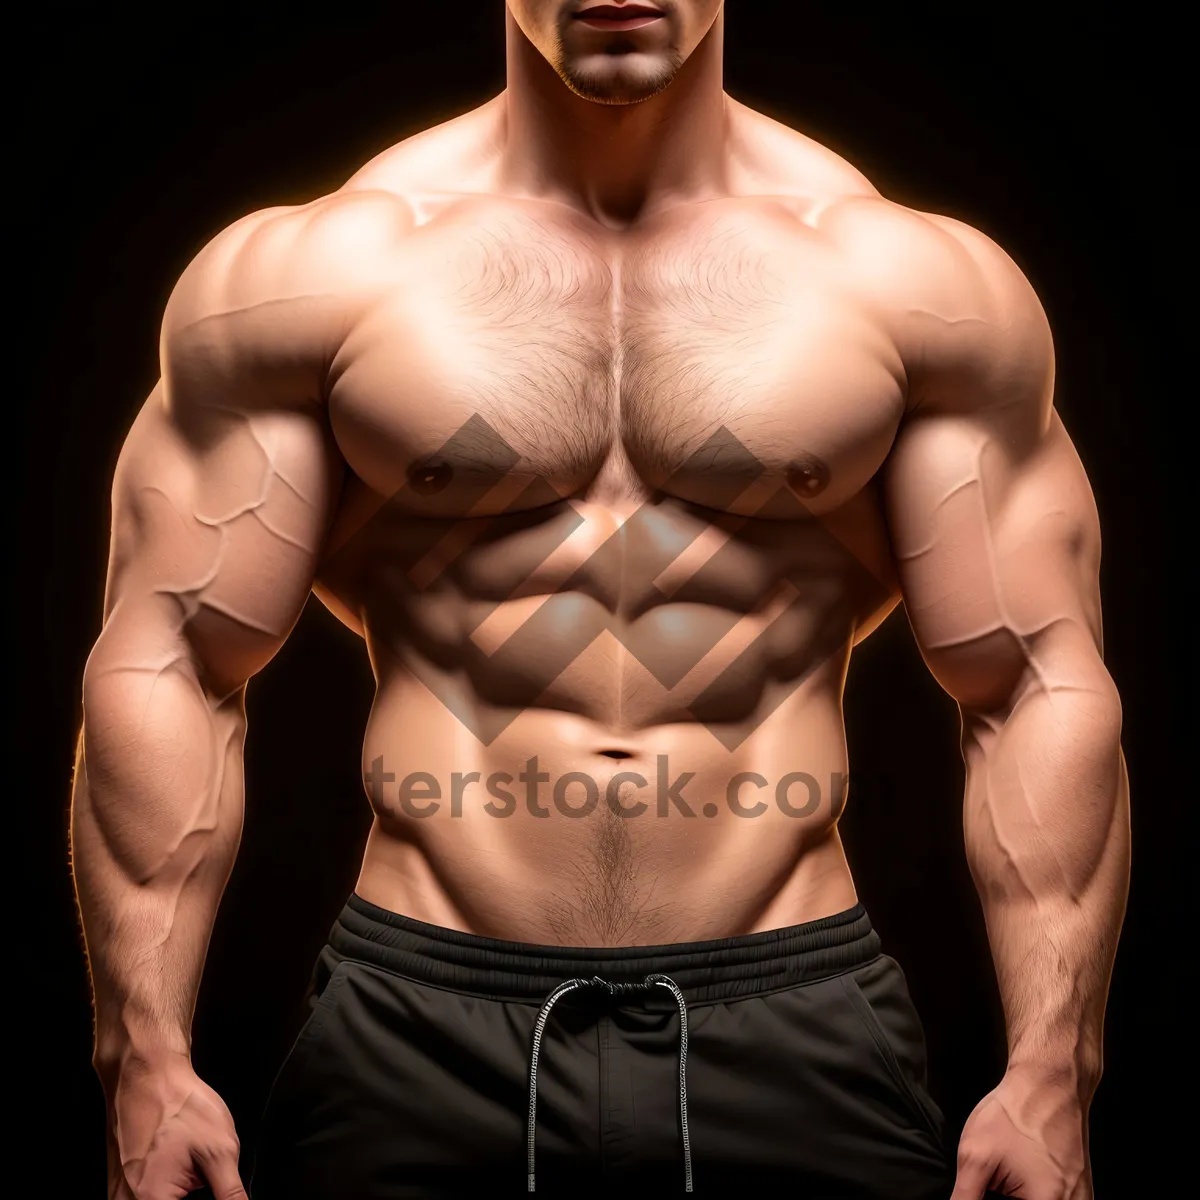 Picture of Powerful Male Body - Muscular Fitness Model Posing